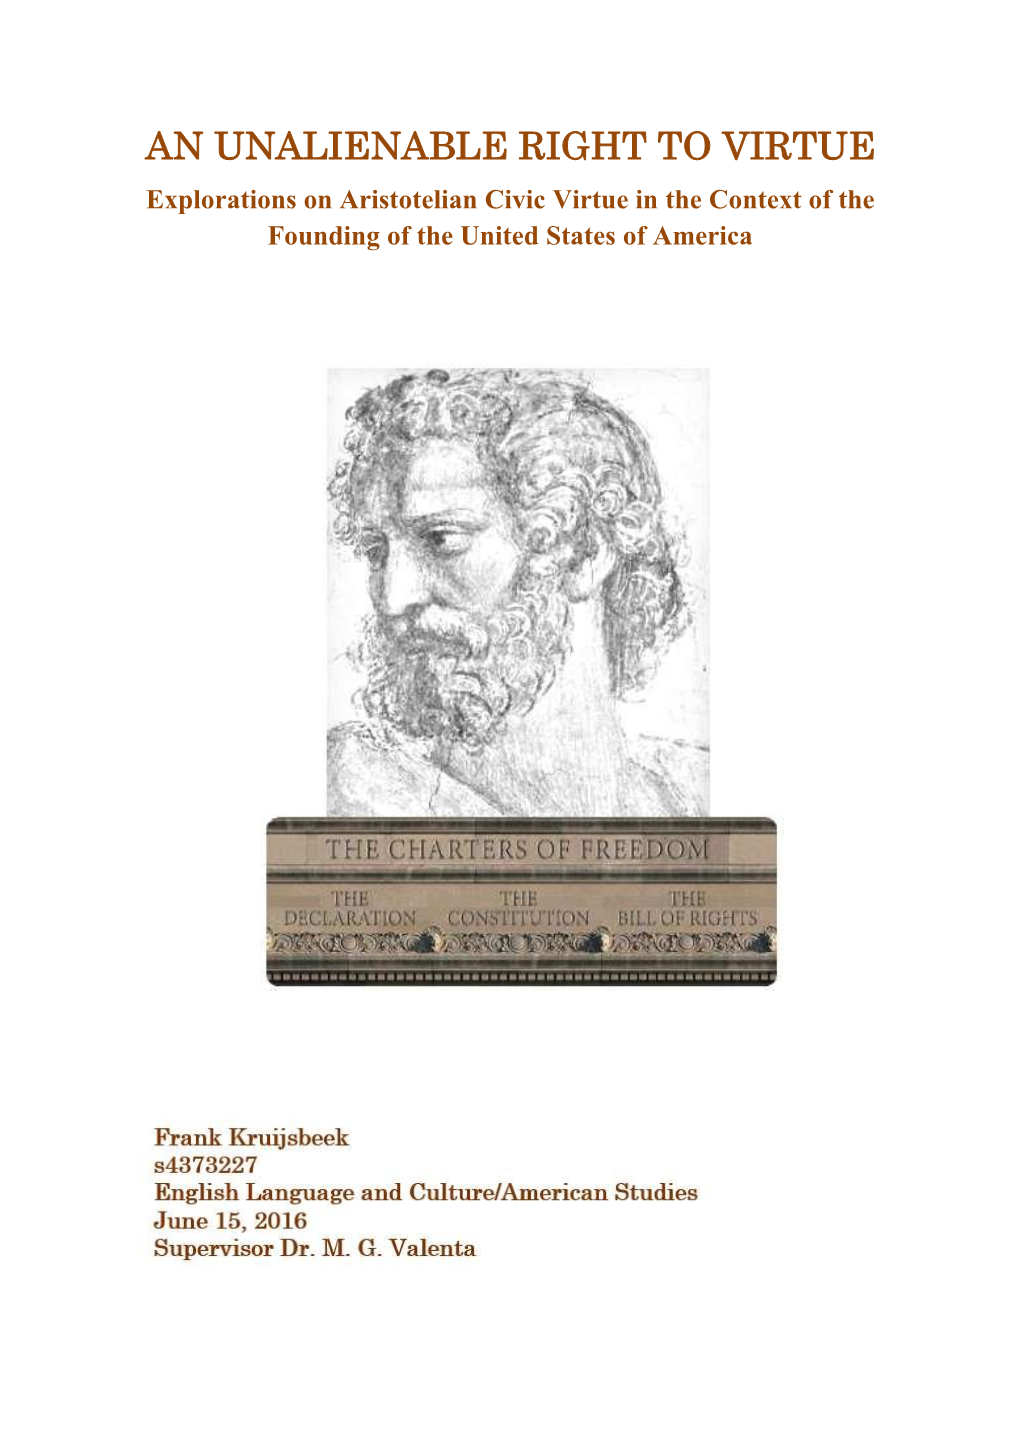 AN UNALIENABLE RIGHT to VIRTUE Explorations on Aristotelian Civic Virtue in the Context of the Founding of the United States of America